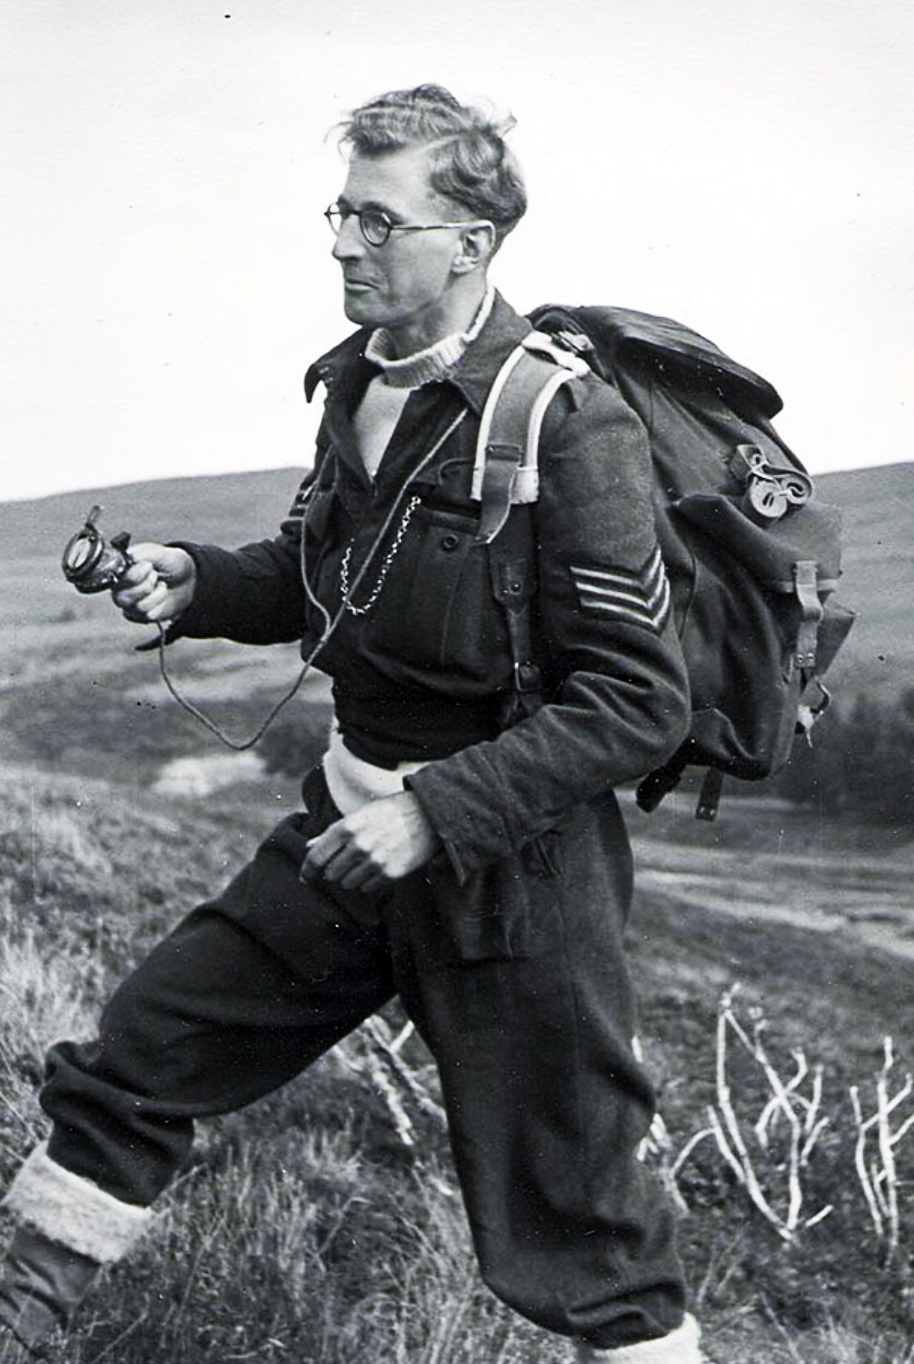 Sergeant in the 1940s on Mountain rescue